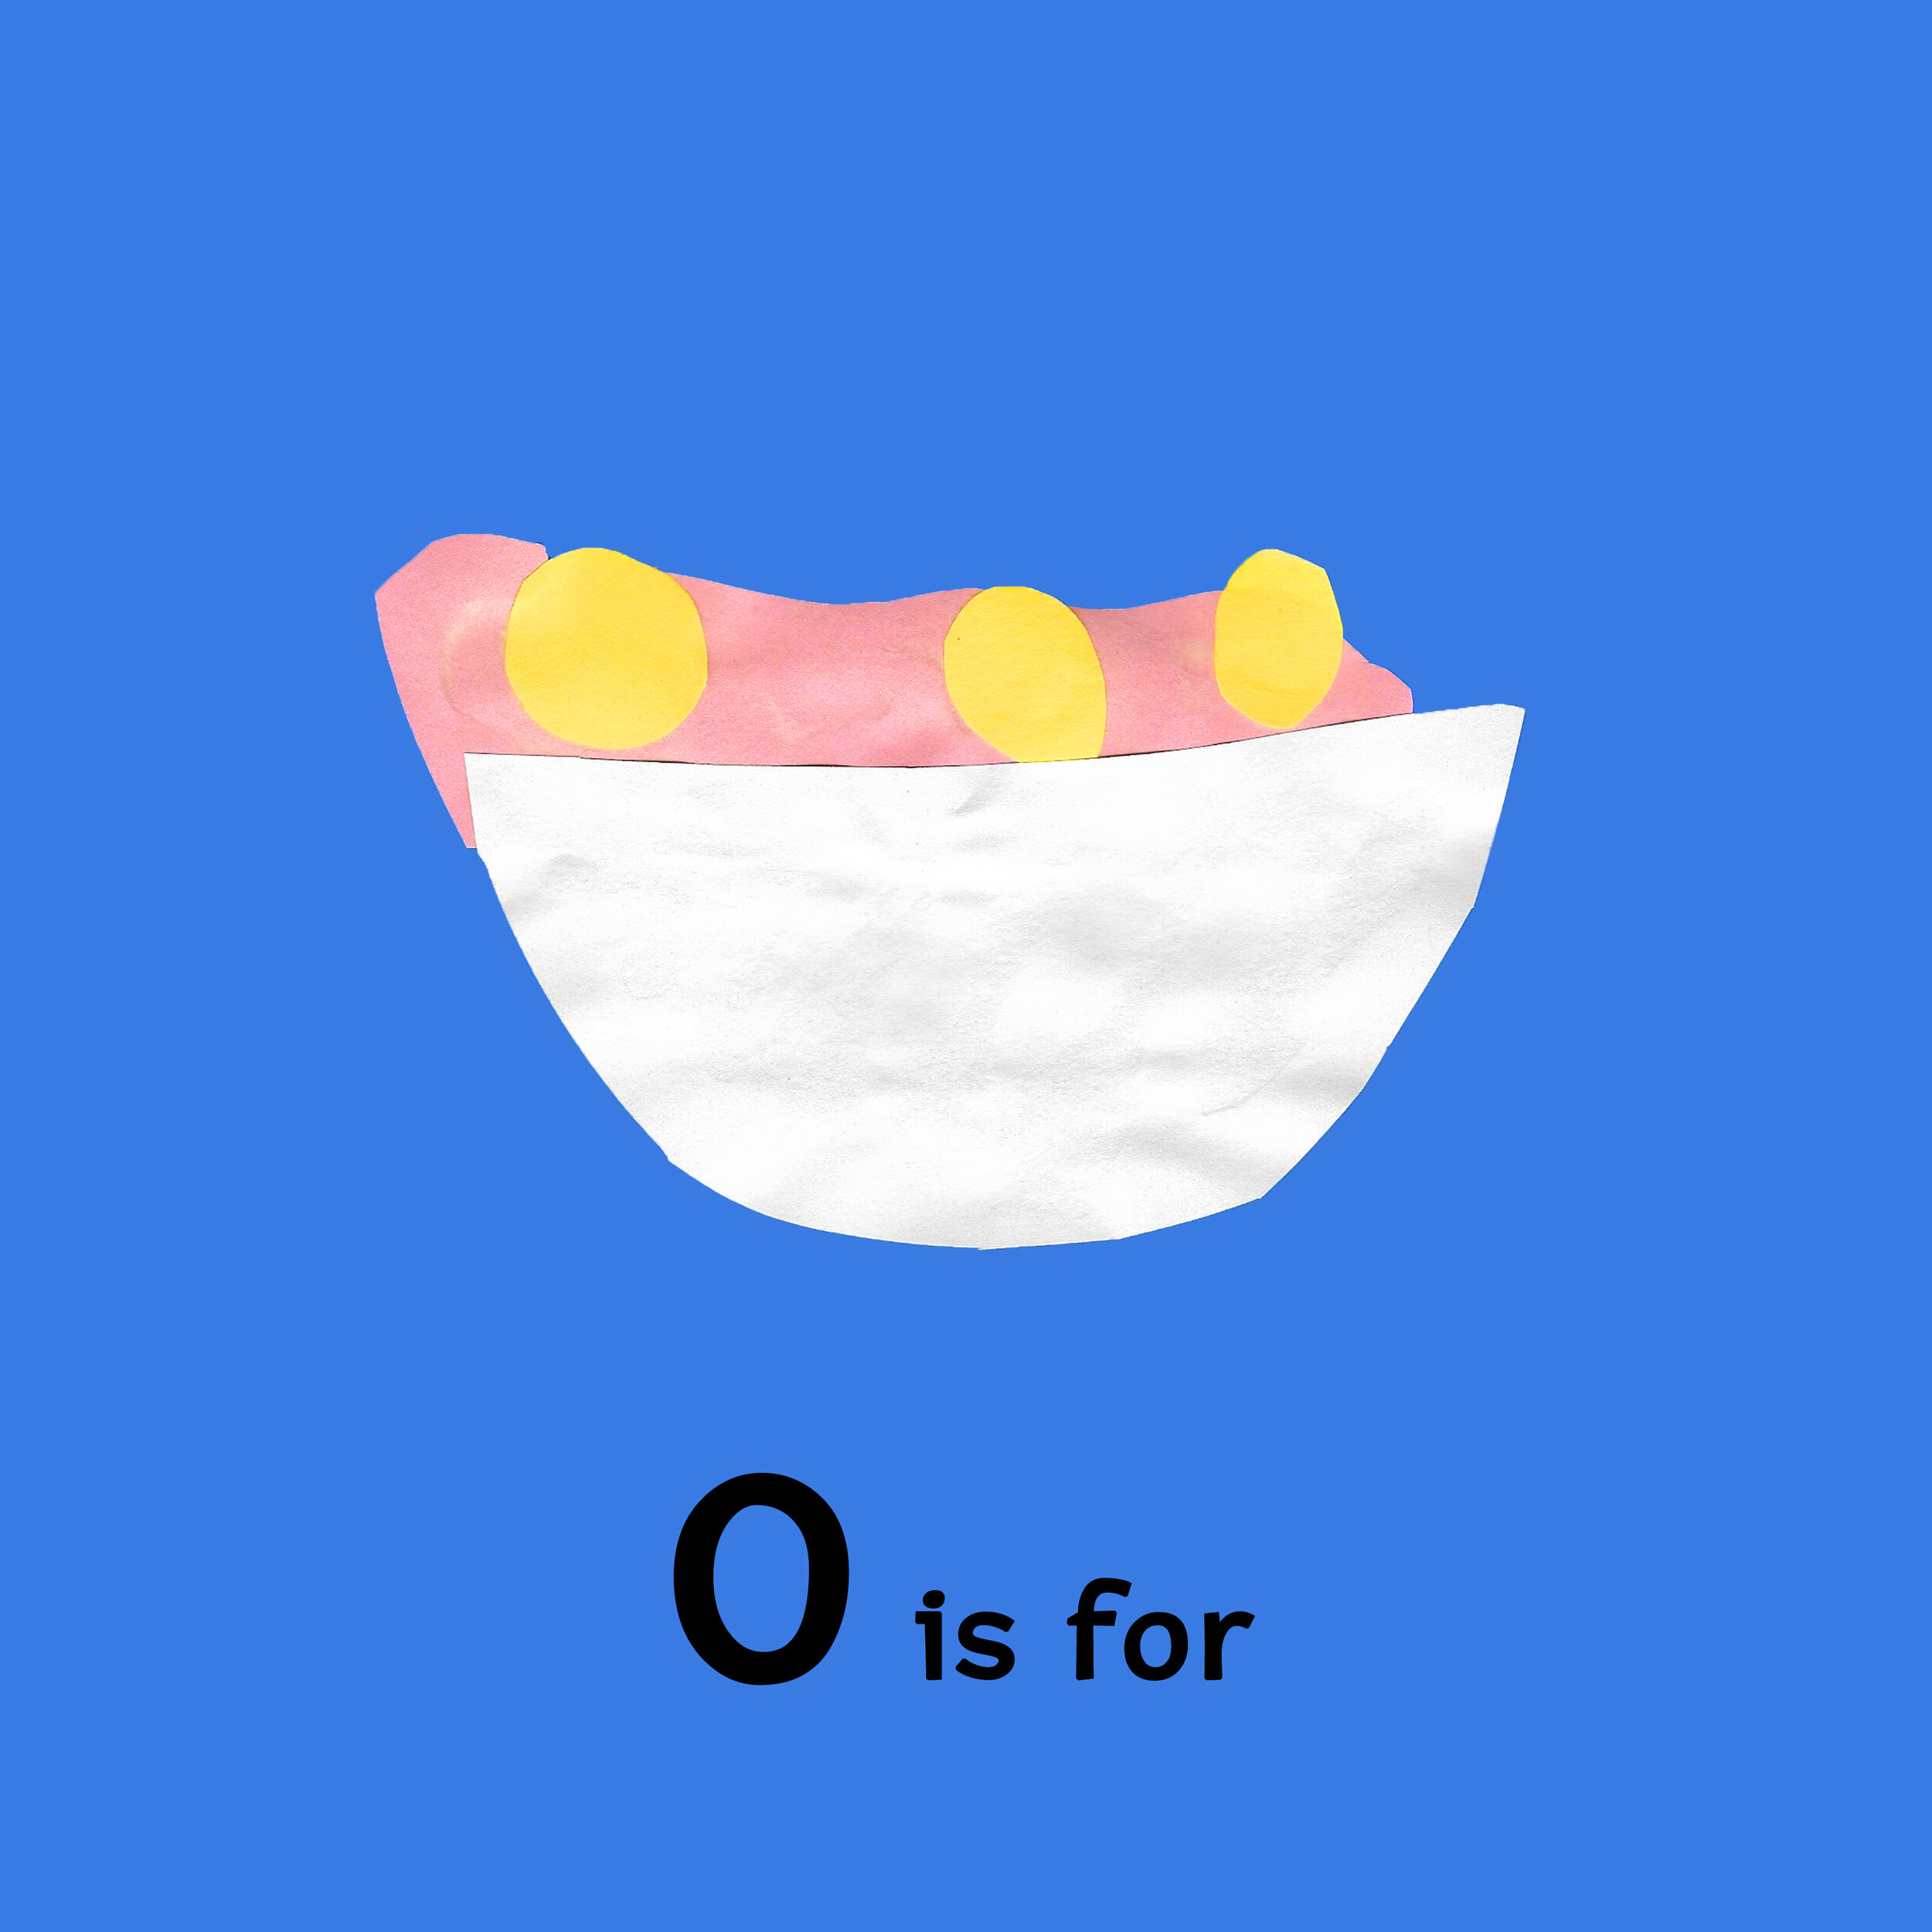 O is for.jpg